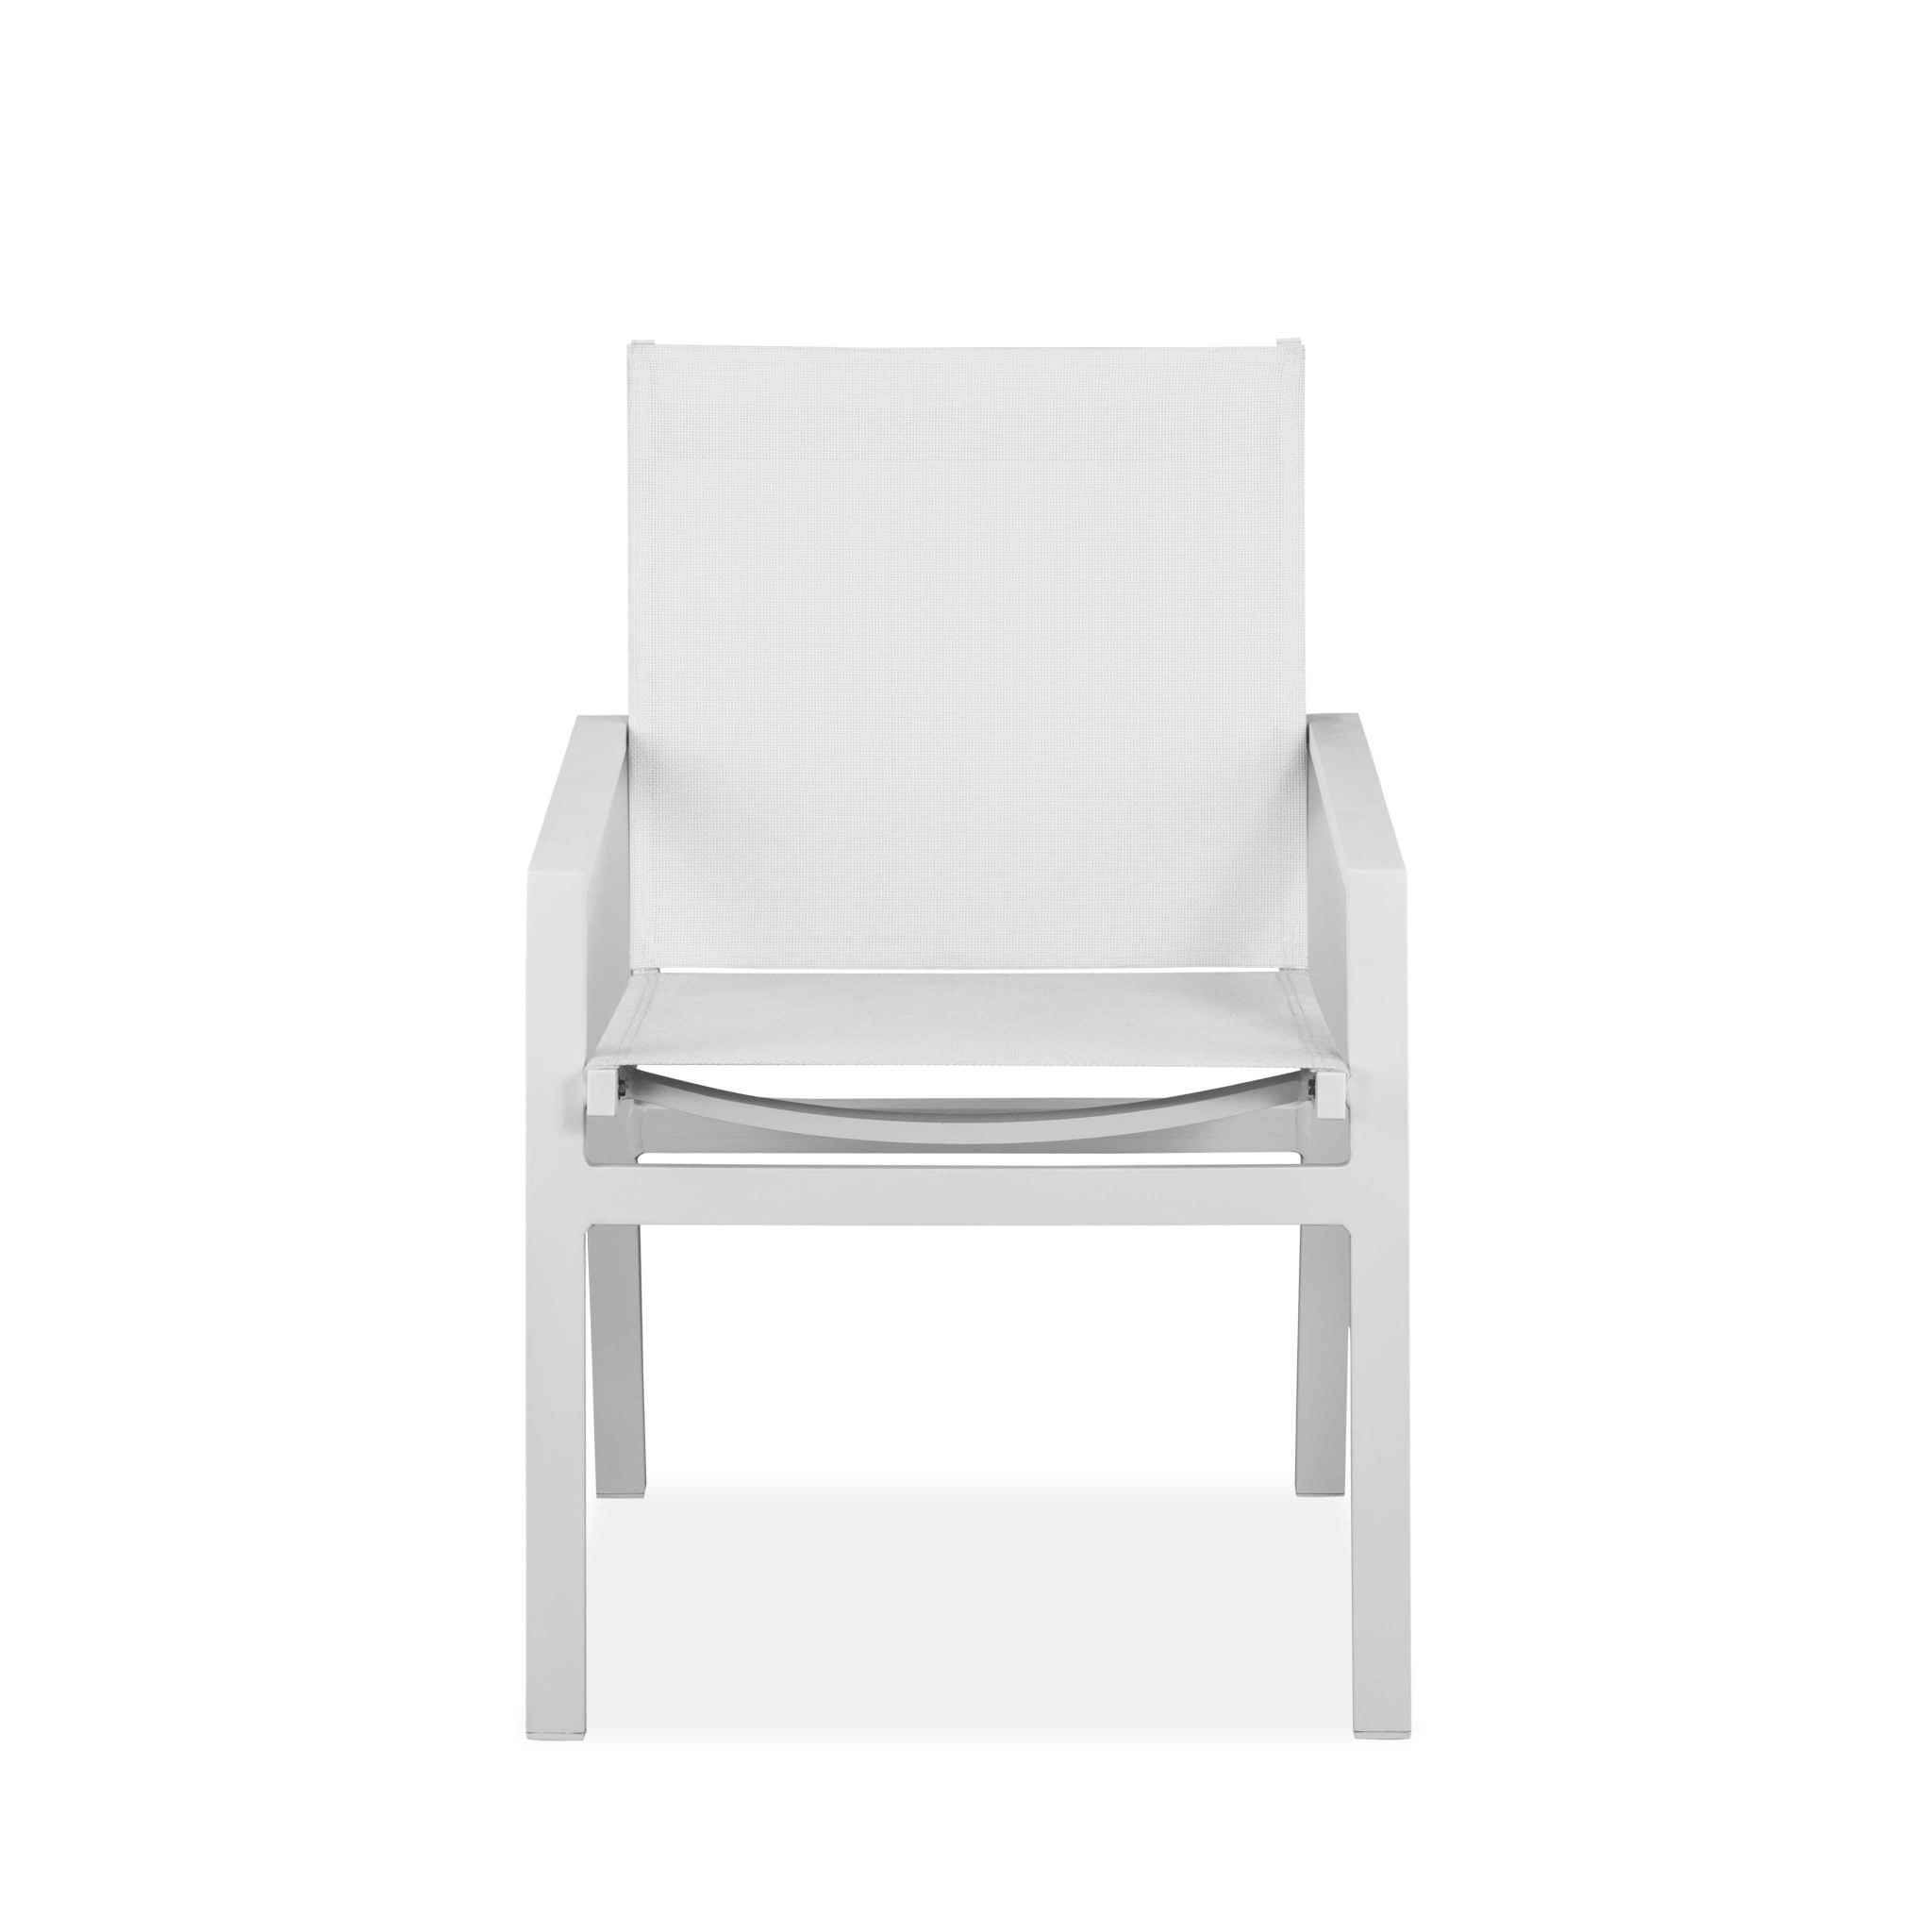 22" X 24" X 34" White Aluminum Dining Armed Chair